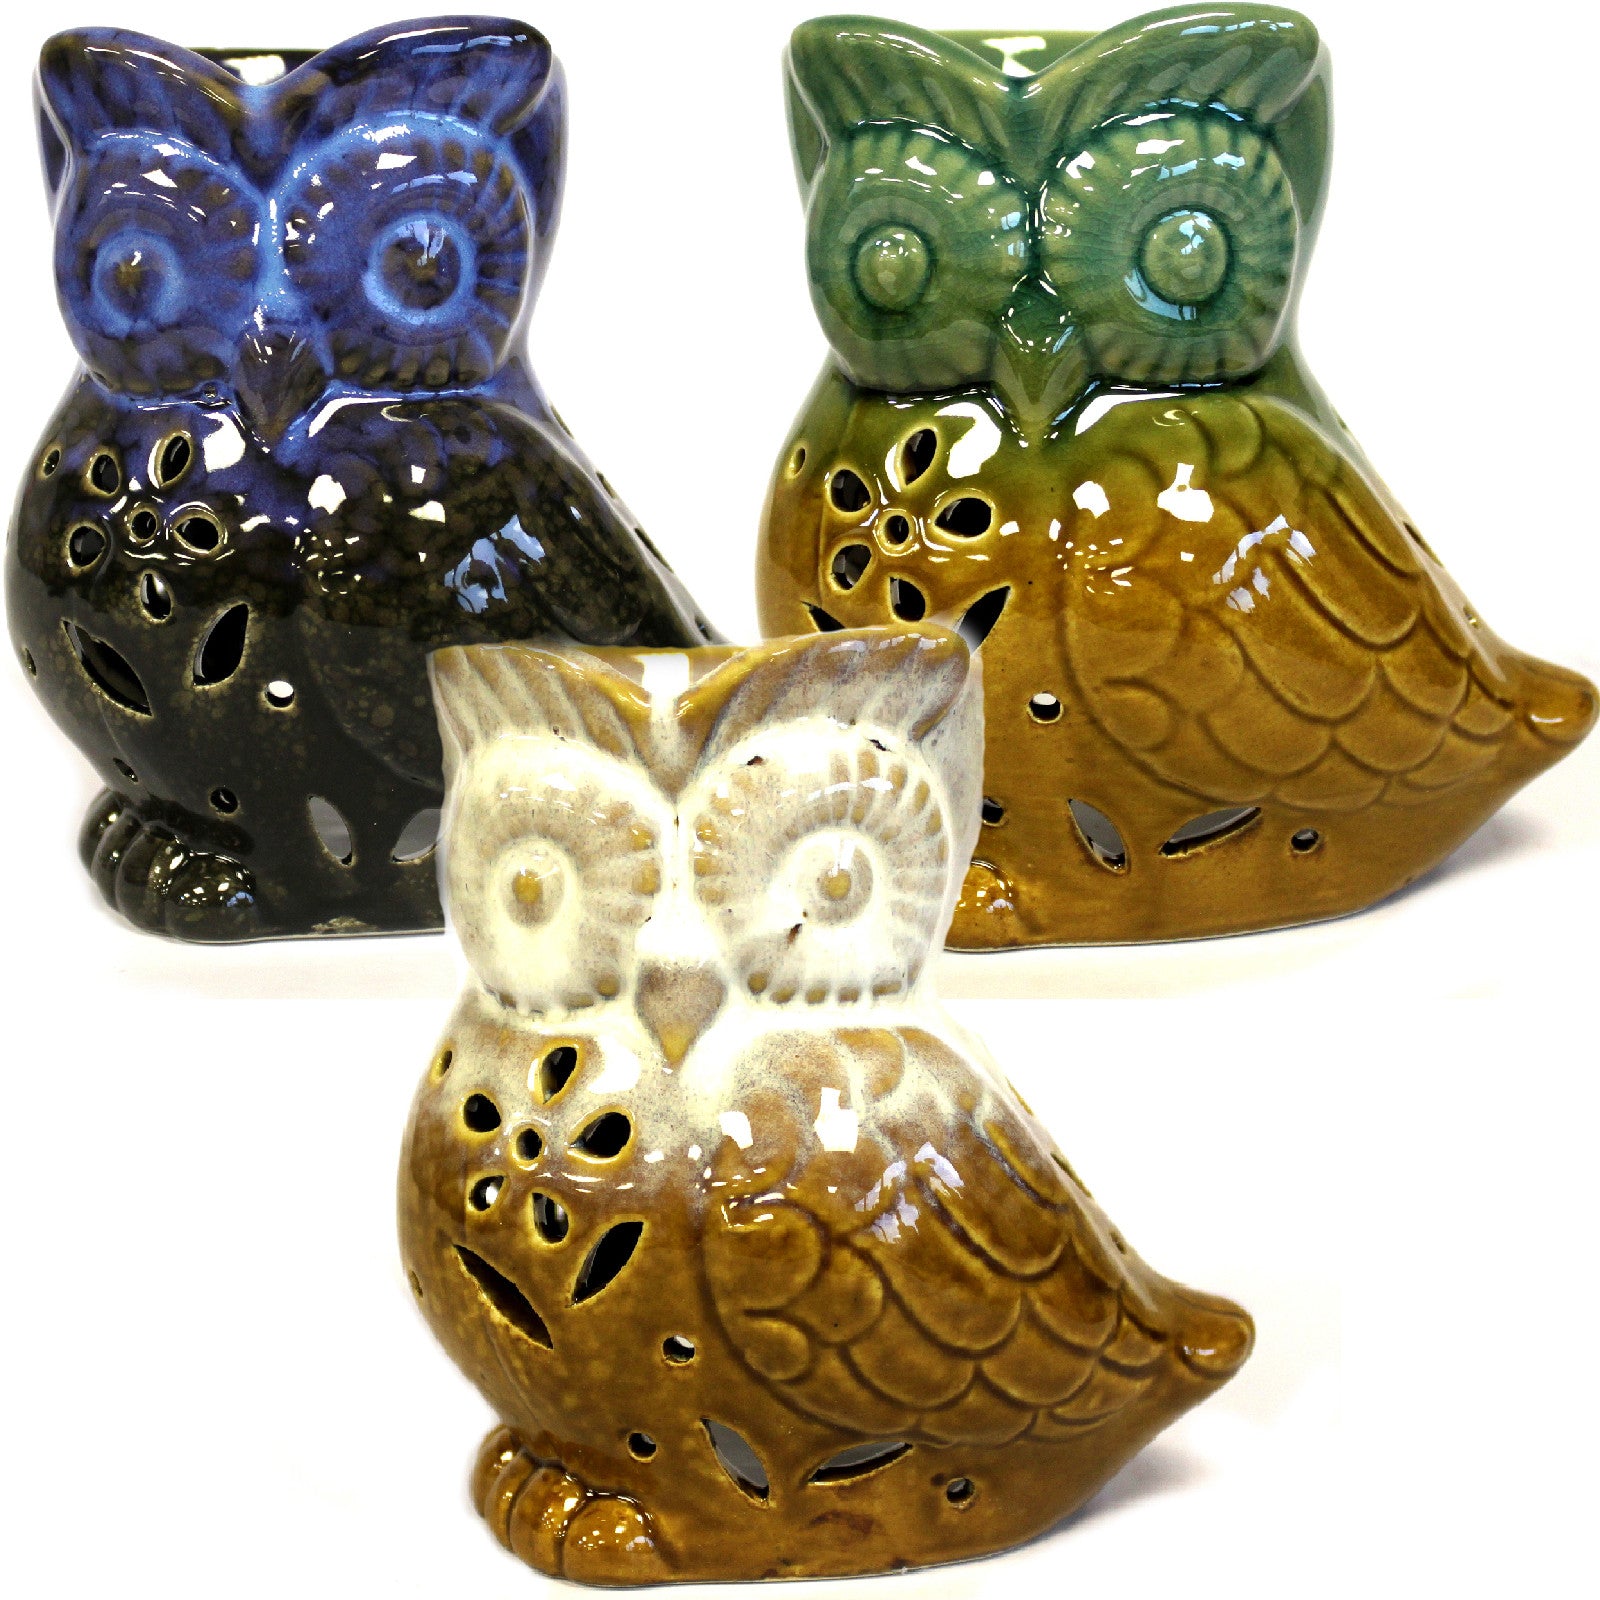 View Classic Rustic Oil Burner Owl Sideon assorted information